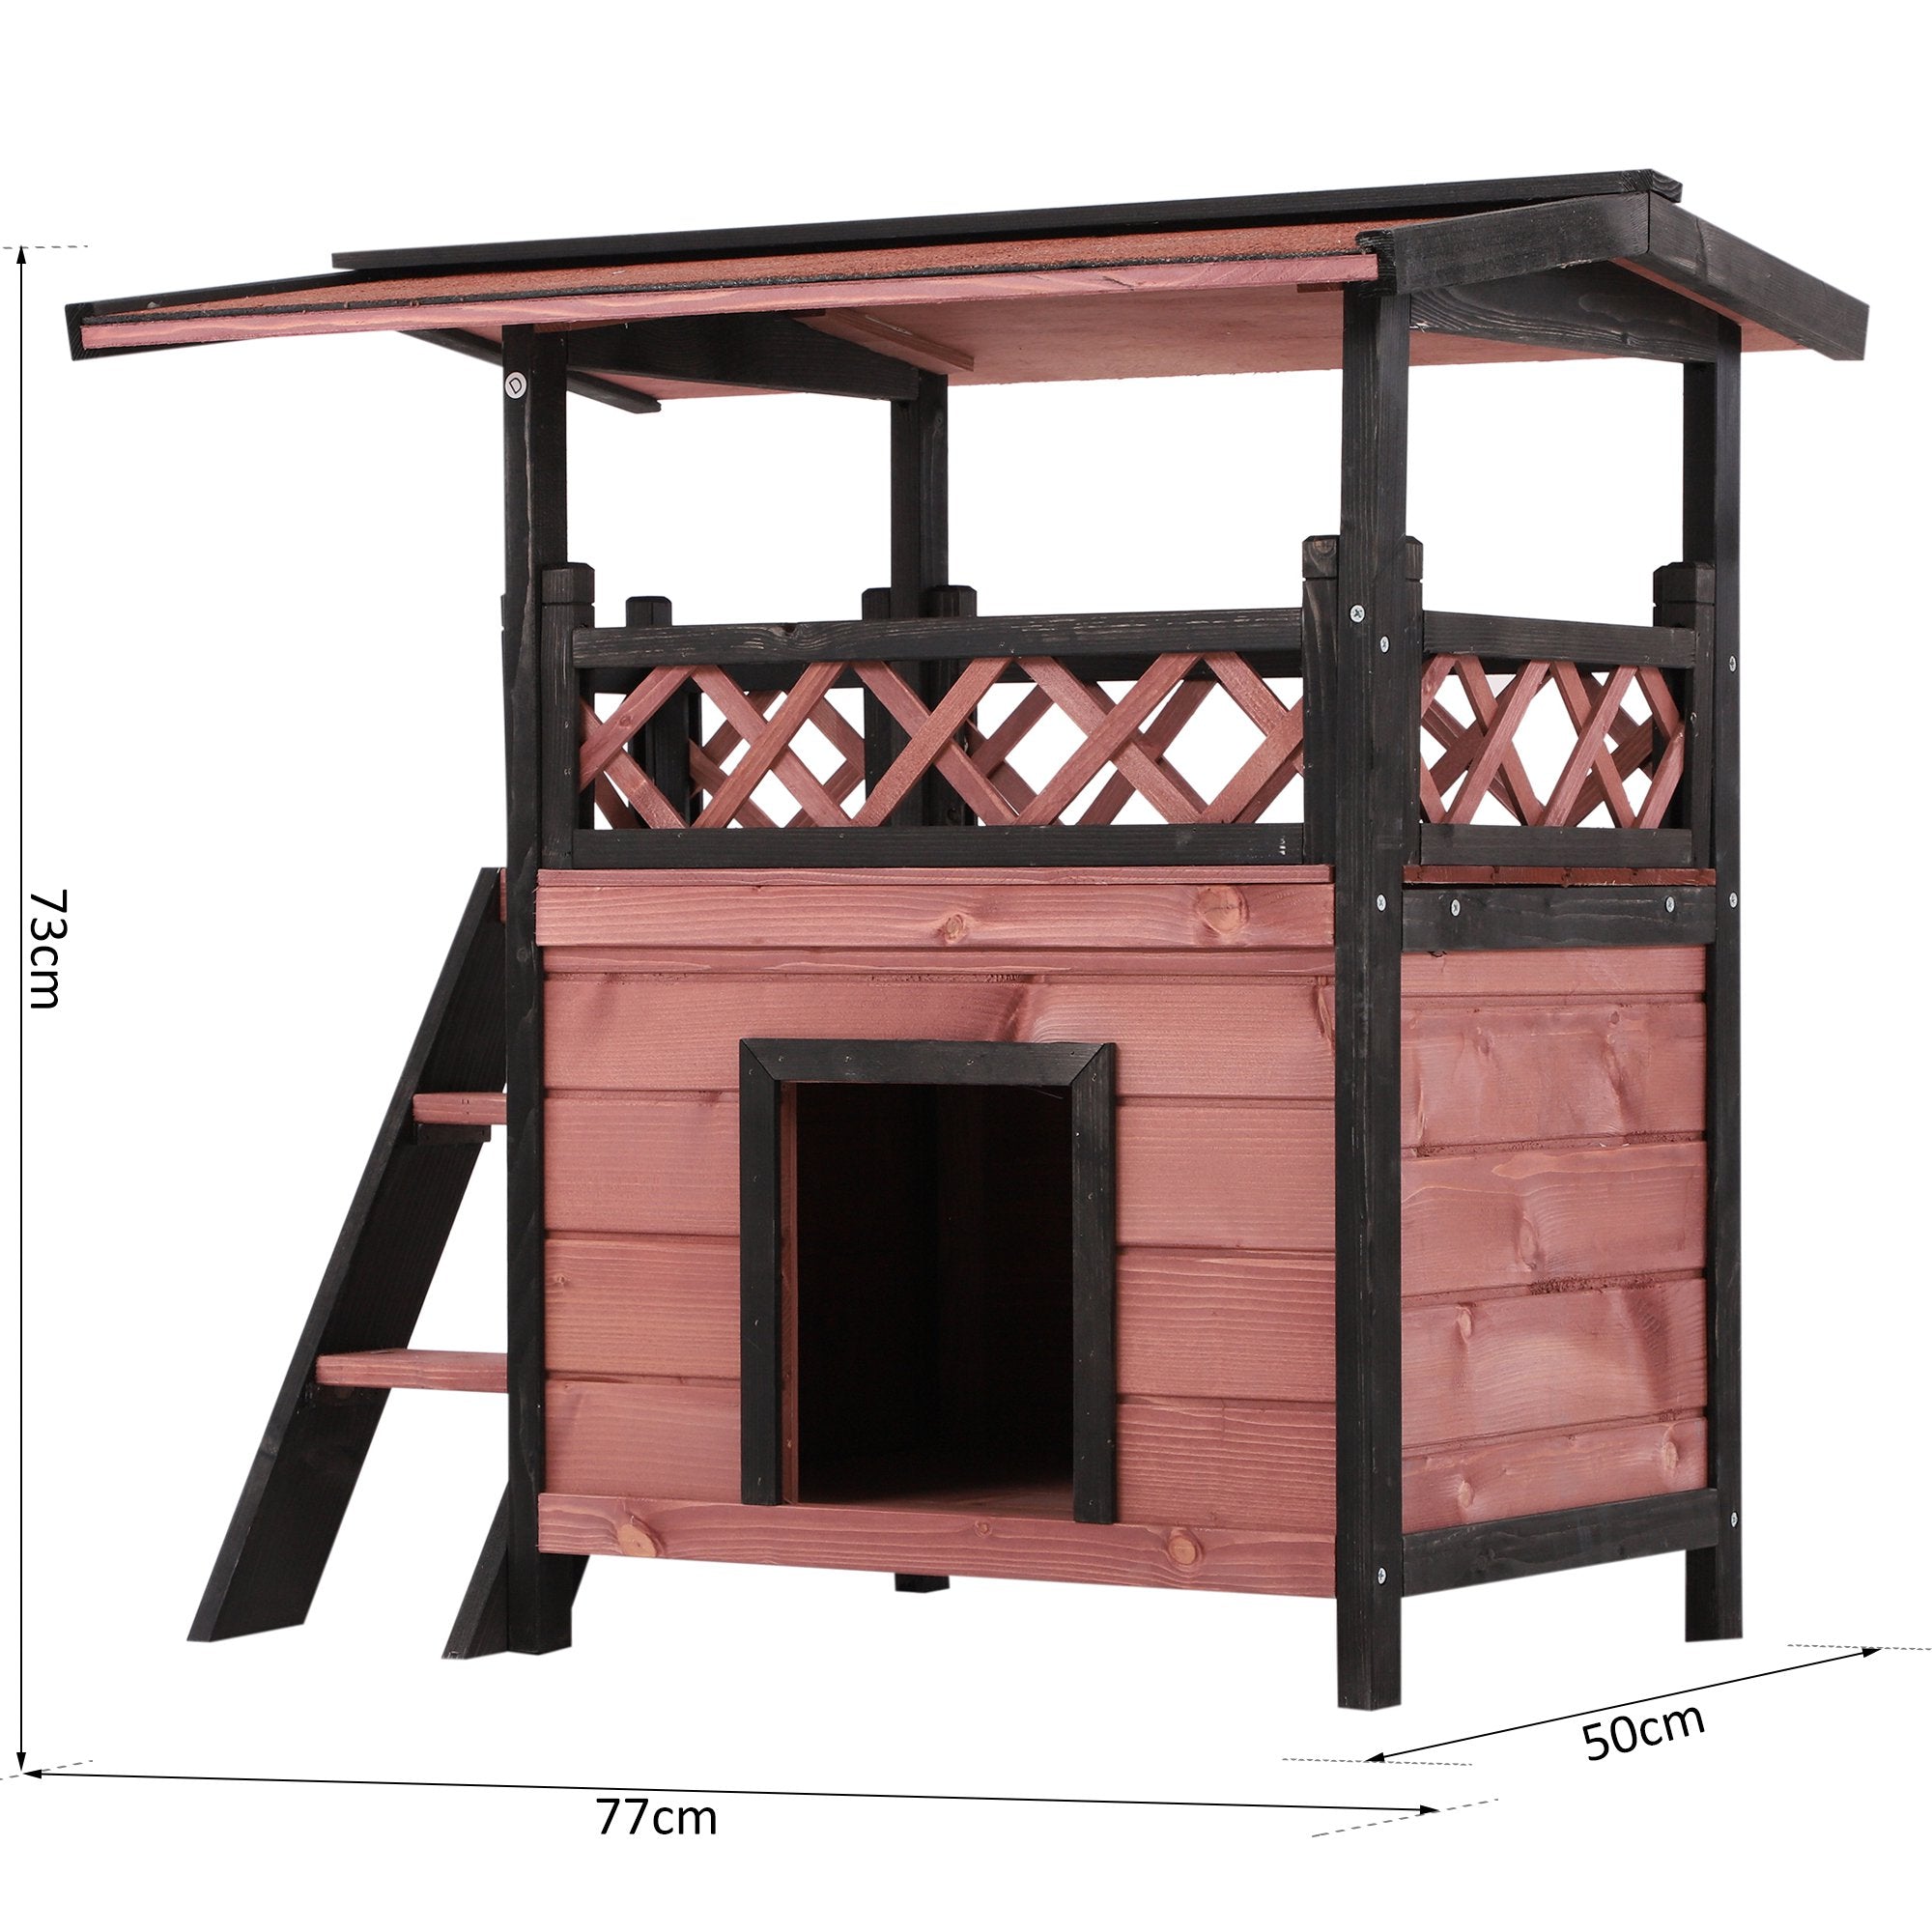 Wood Cat House Outdoor Luxury Wooden Room View Patio Weatherproof Shelter Puppy Garden Scratch Post Large Kennel Crate